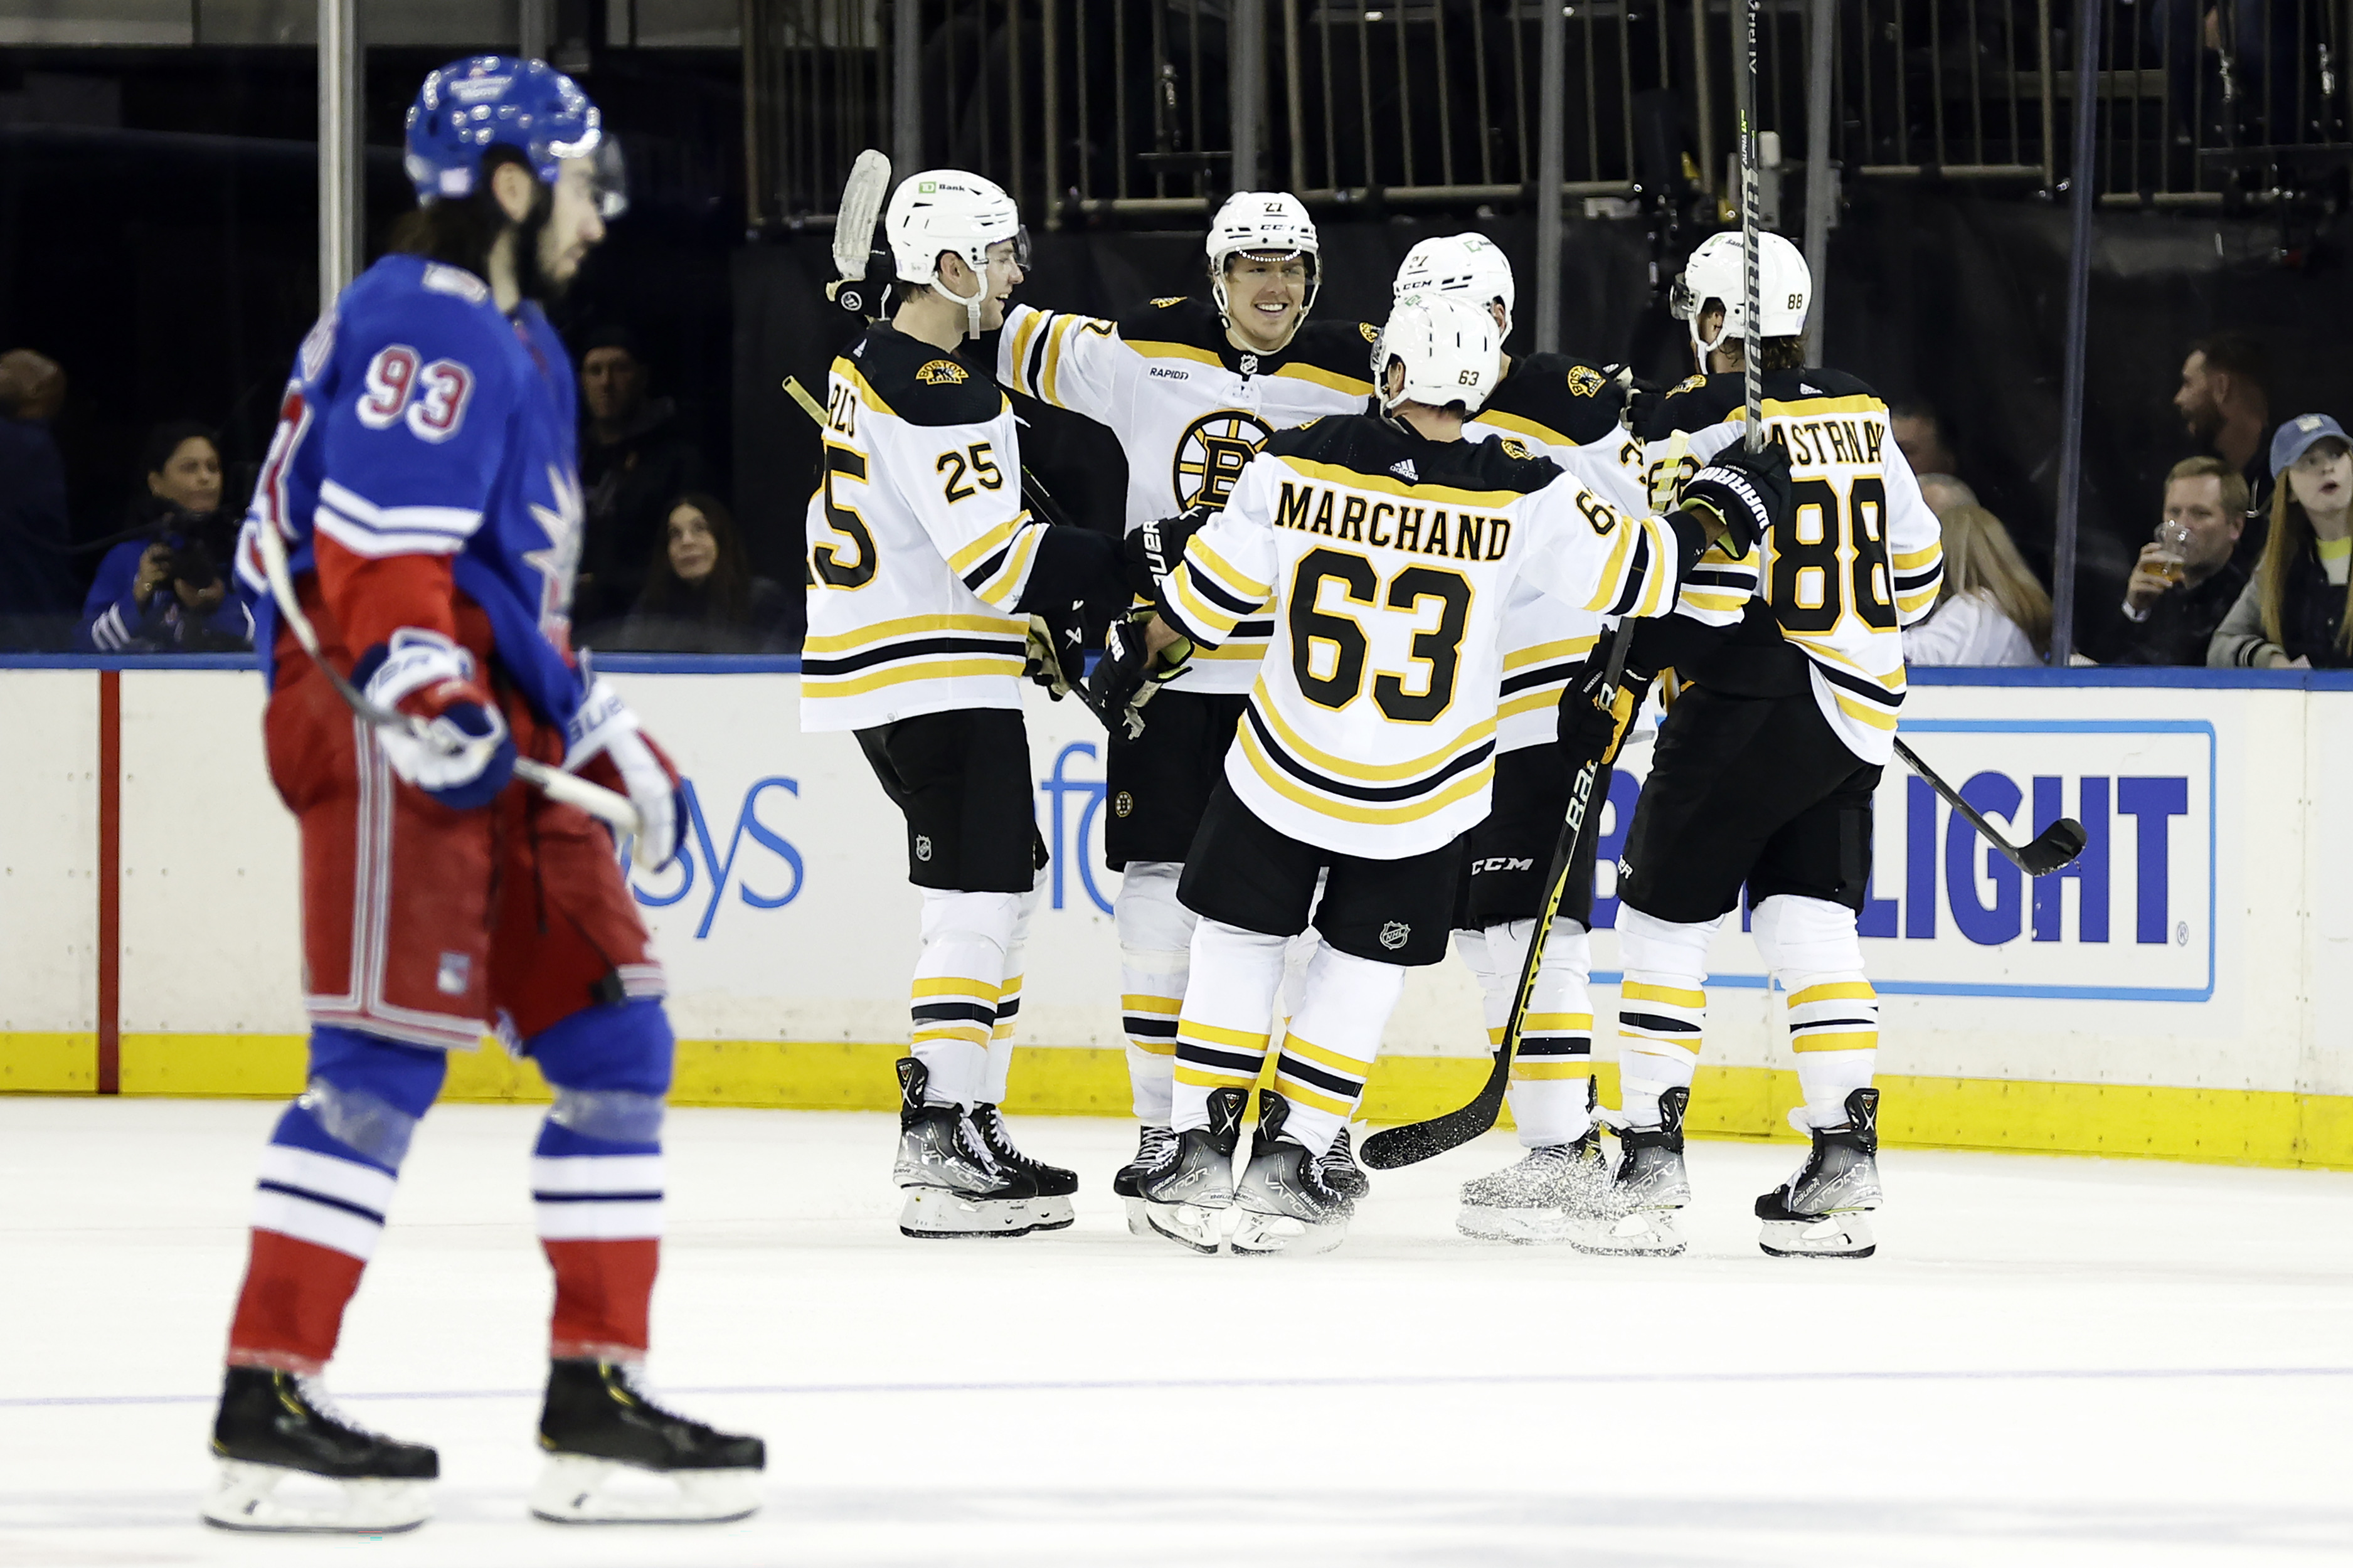 Boston Bruins center Charlie Coyle (13) celebrates after scoring a goal  against the New York Rangers during the second period of an NHL hockey  game, Sunday, Oct. 27, 2019, at Madison Square